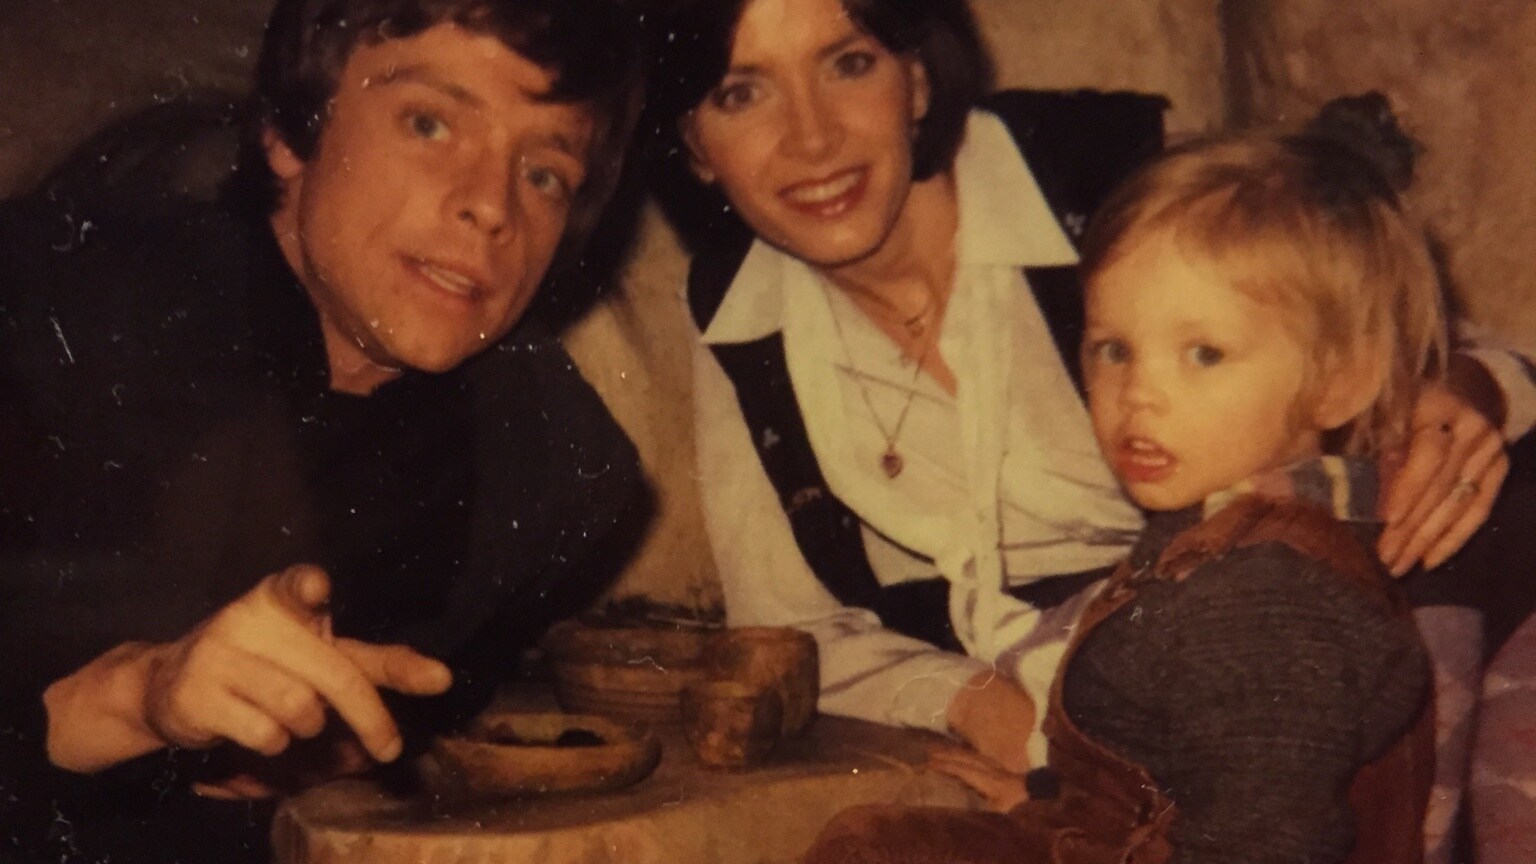 Jedi family dinner: Mark Hamill with wife Marilou and son Nathan in Yoda's hut.